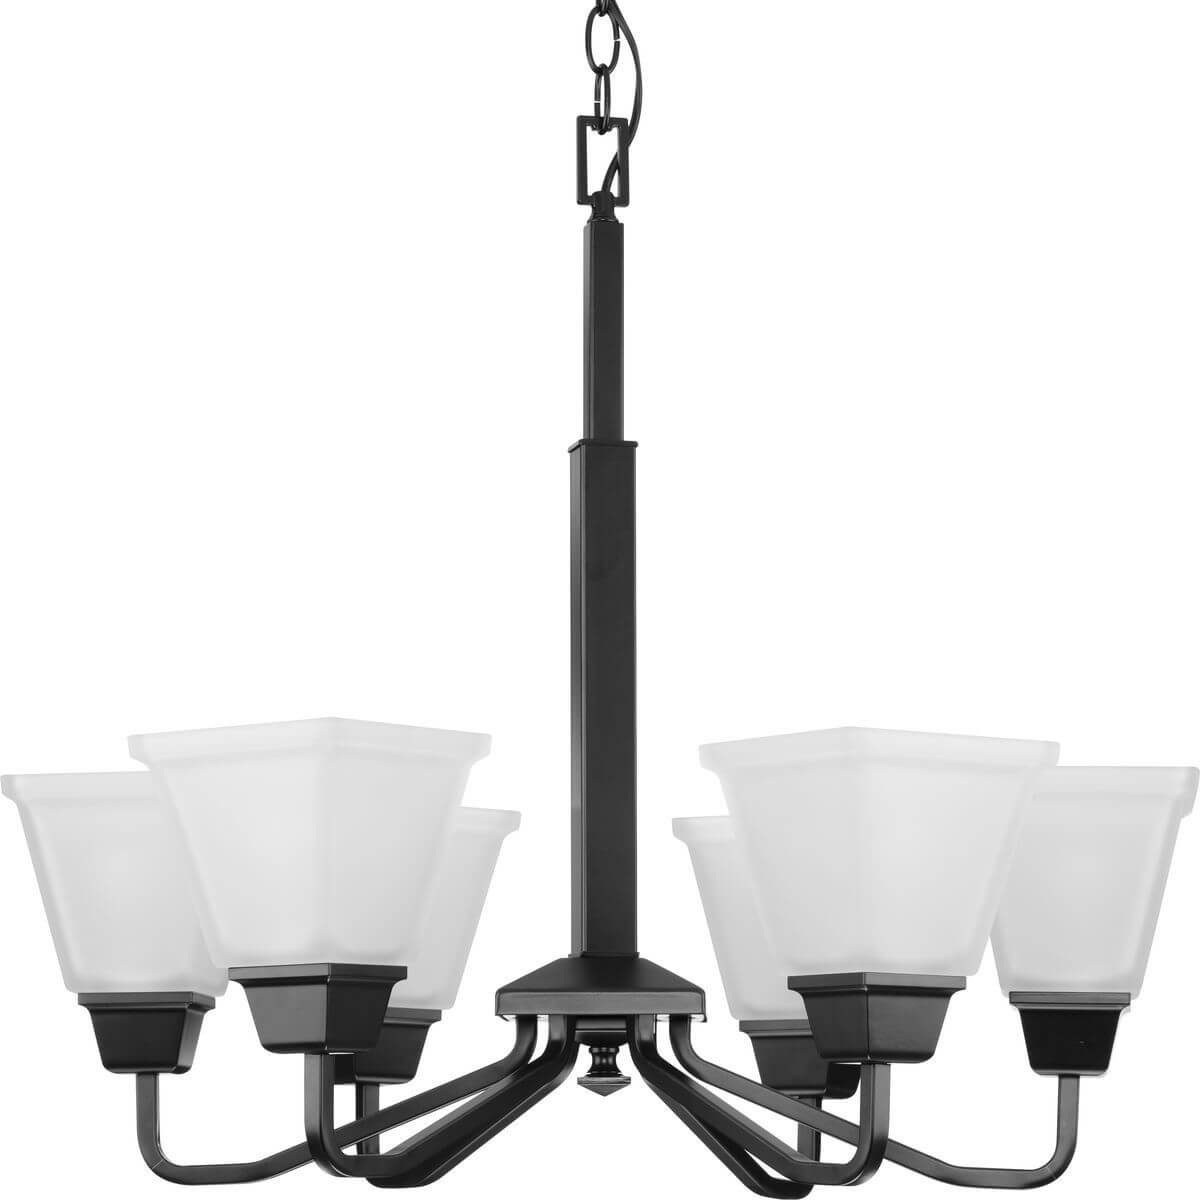 Progress Lighting Clifton Heights 6 Light 26 inch Chandelier in Matte Black with Etched Glass P400119-31M